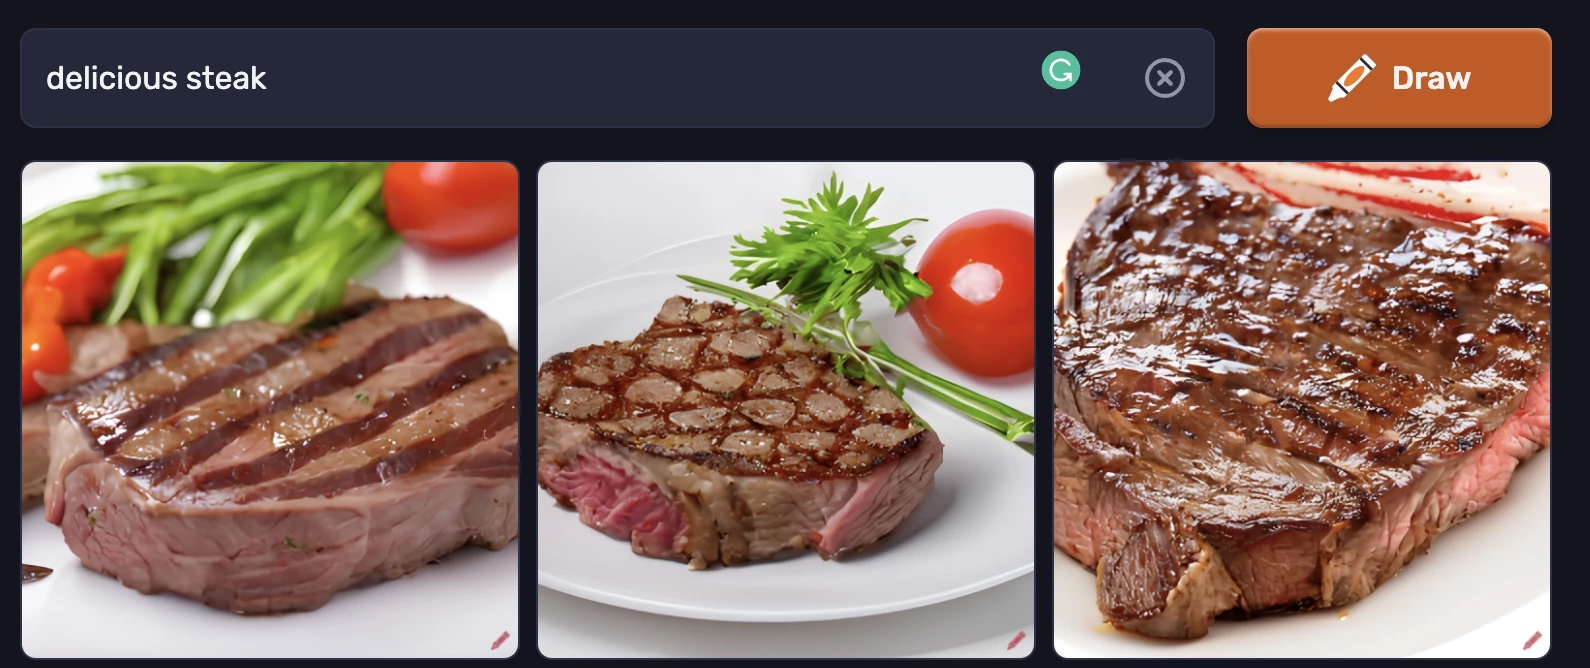 AI-generated image of a steak